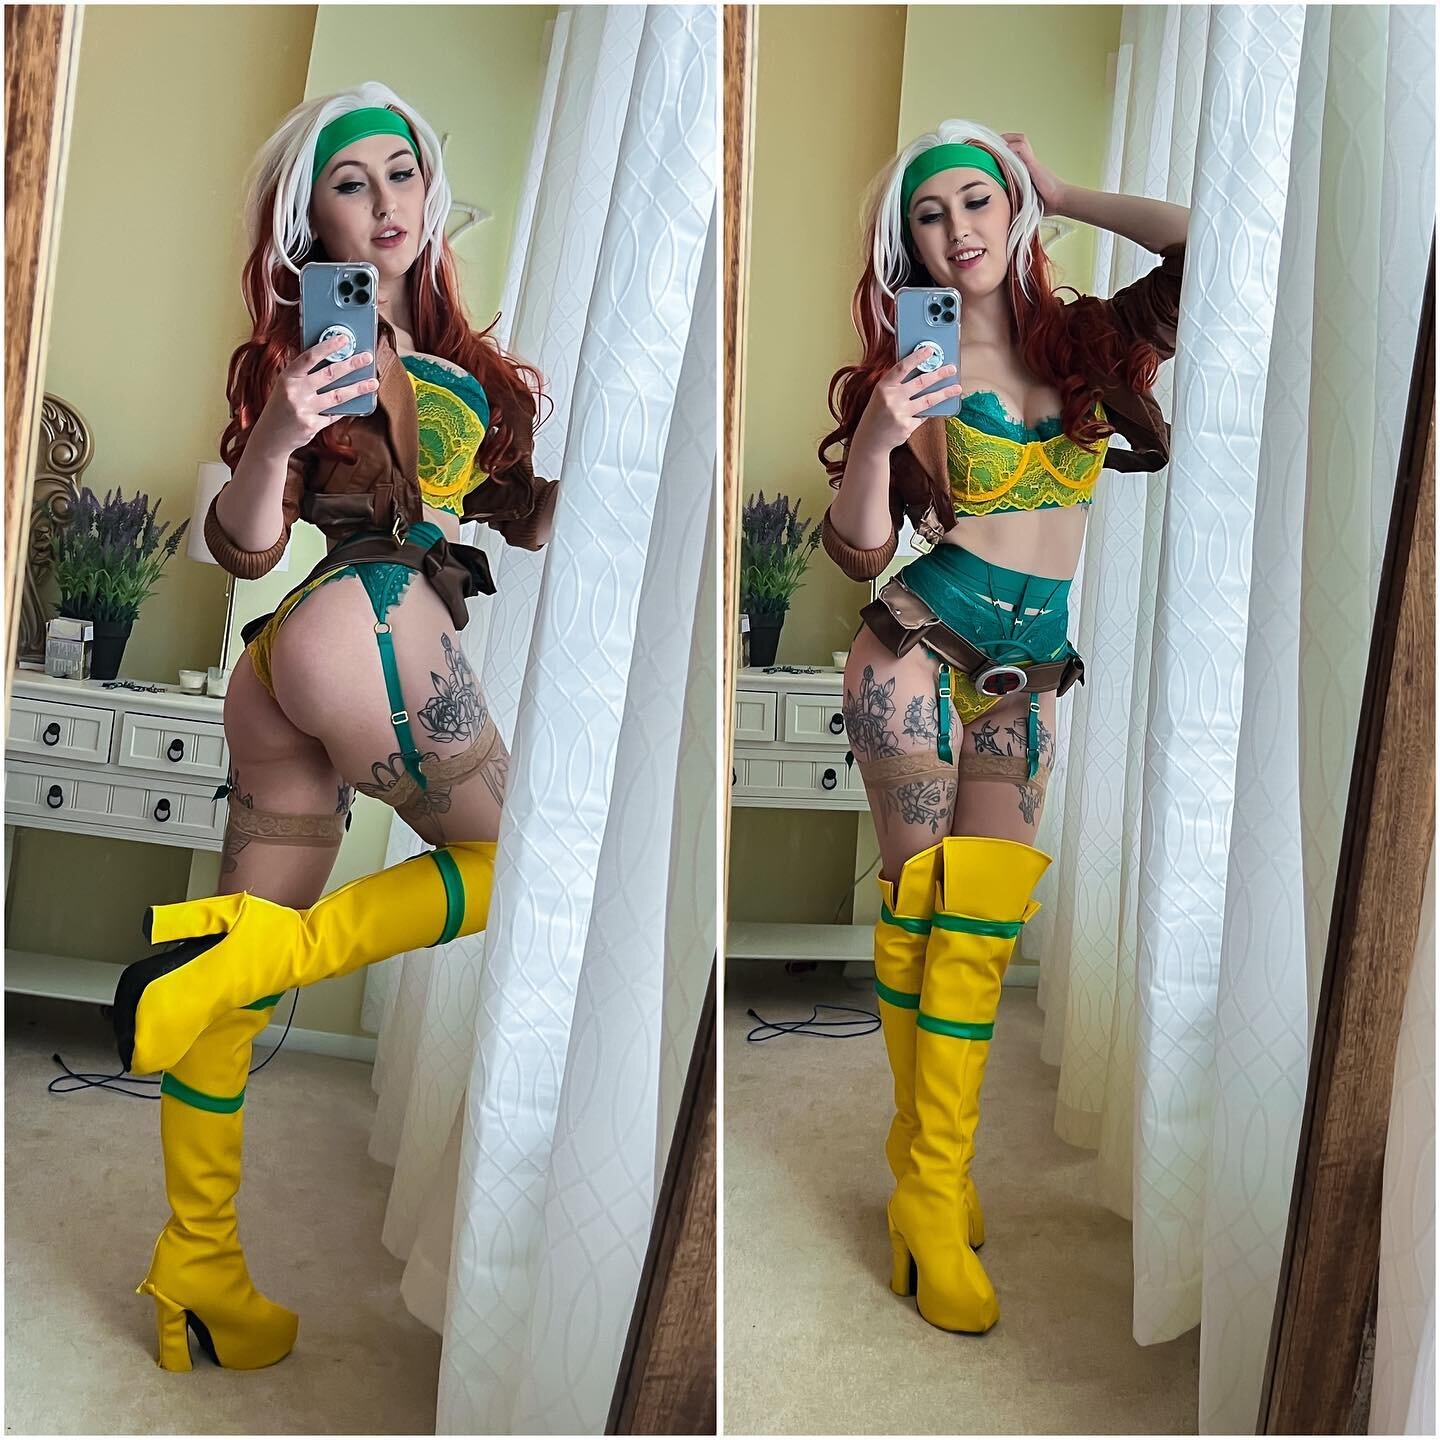 Only Gambit can survive this 😂 #roguexmen #rogue #cosplaygirl